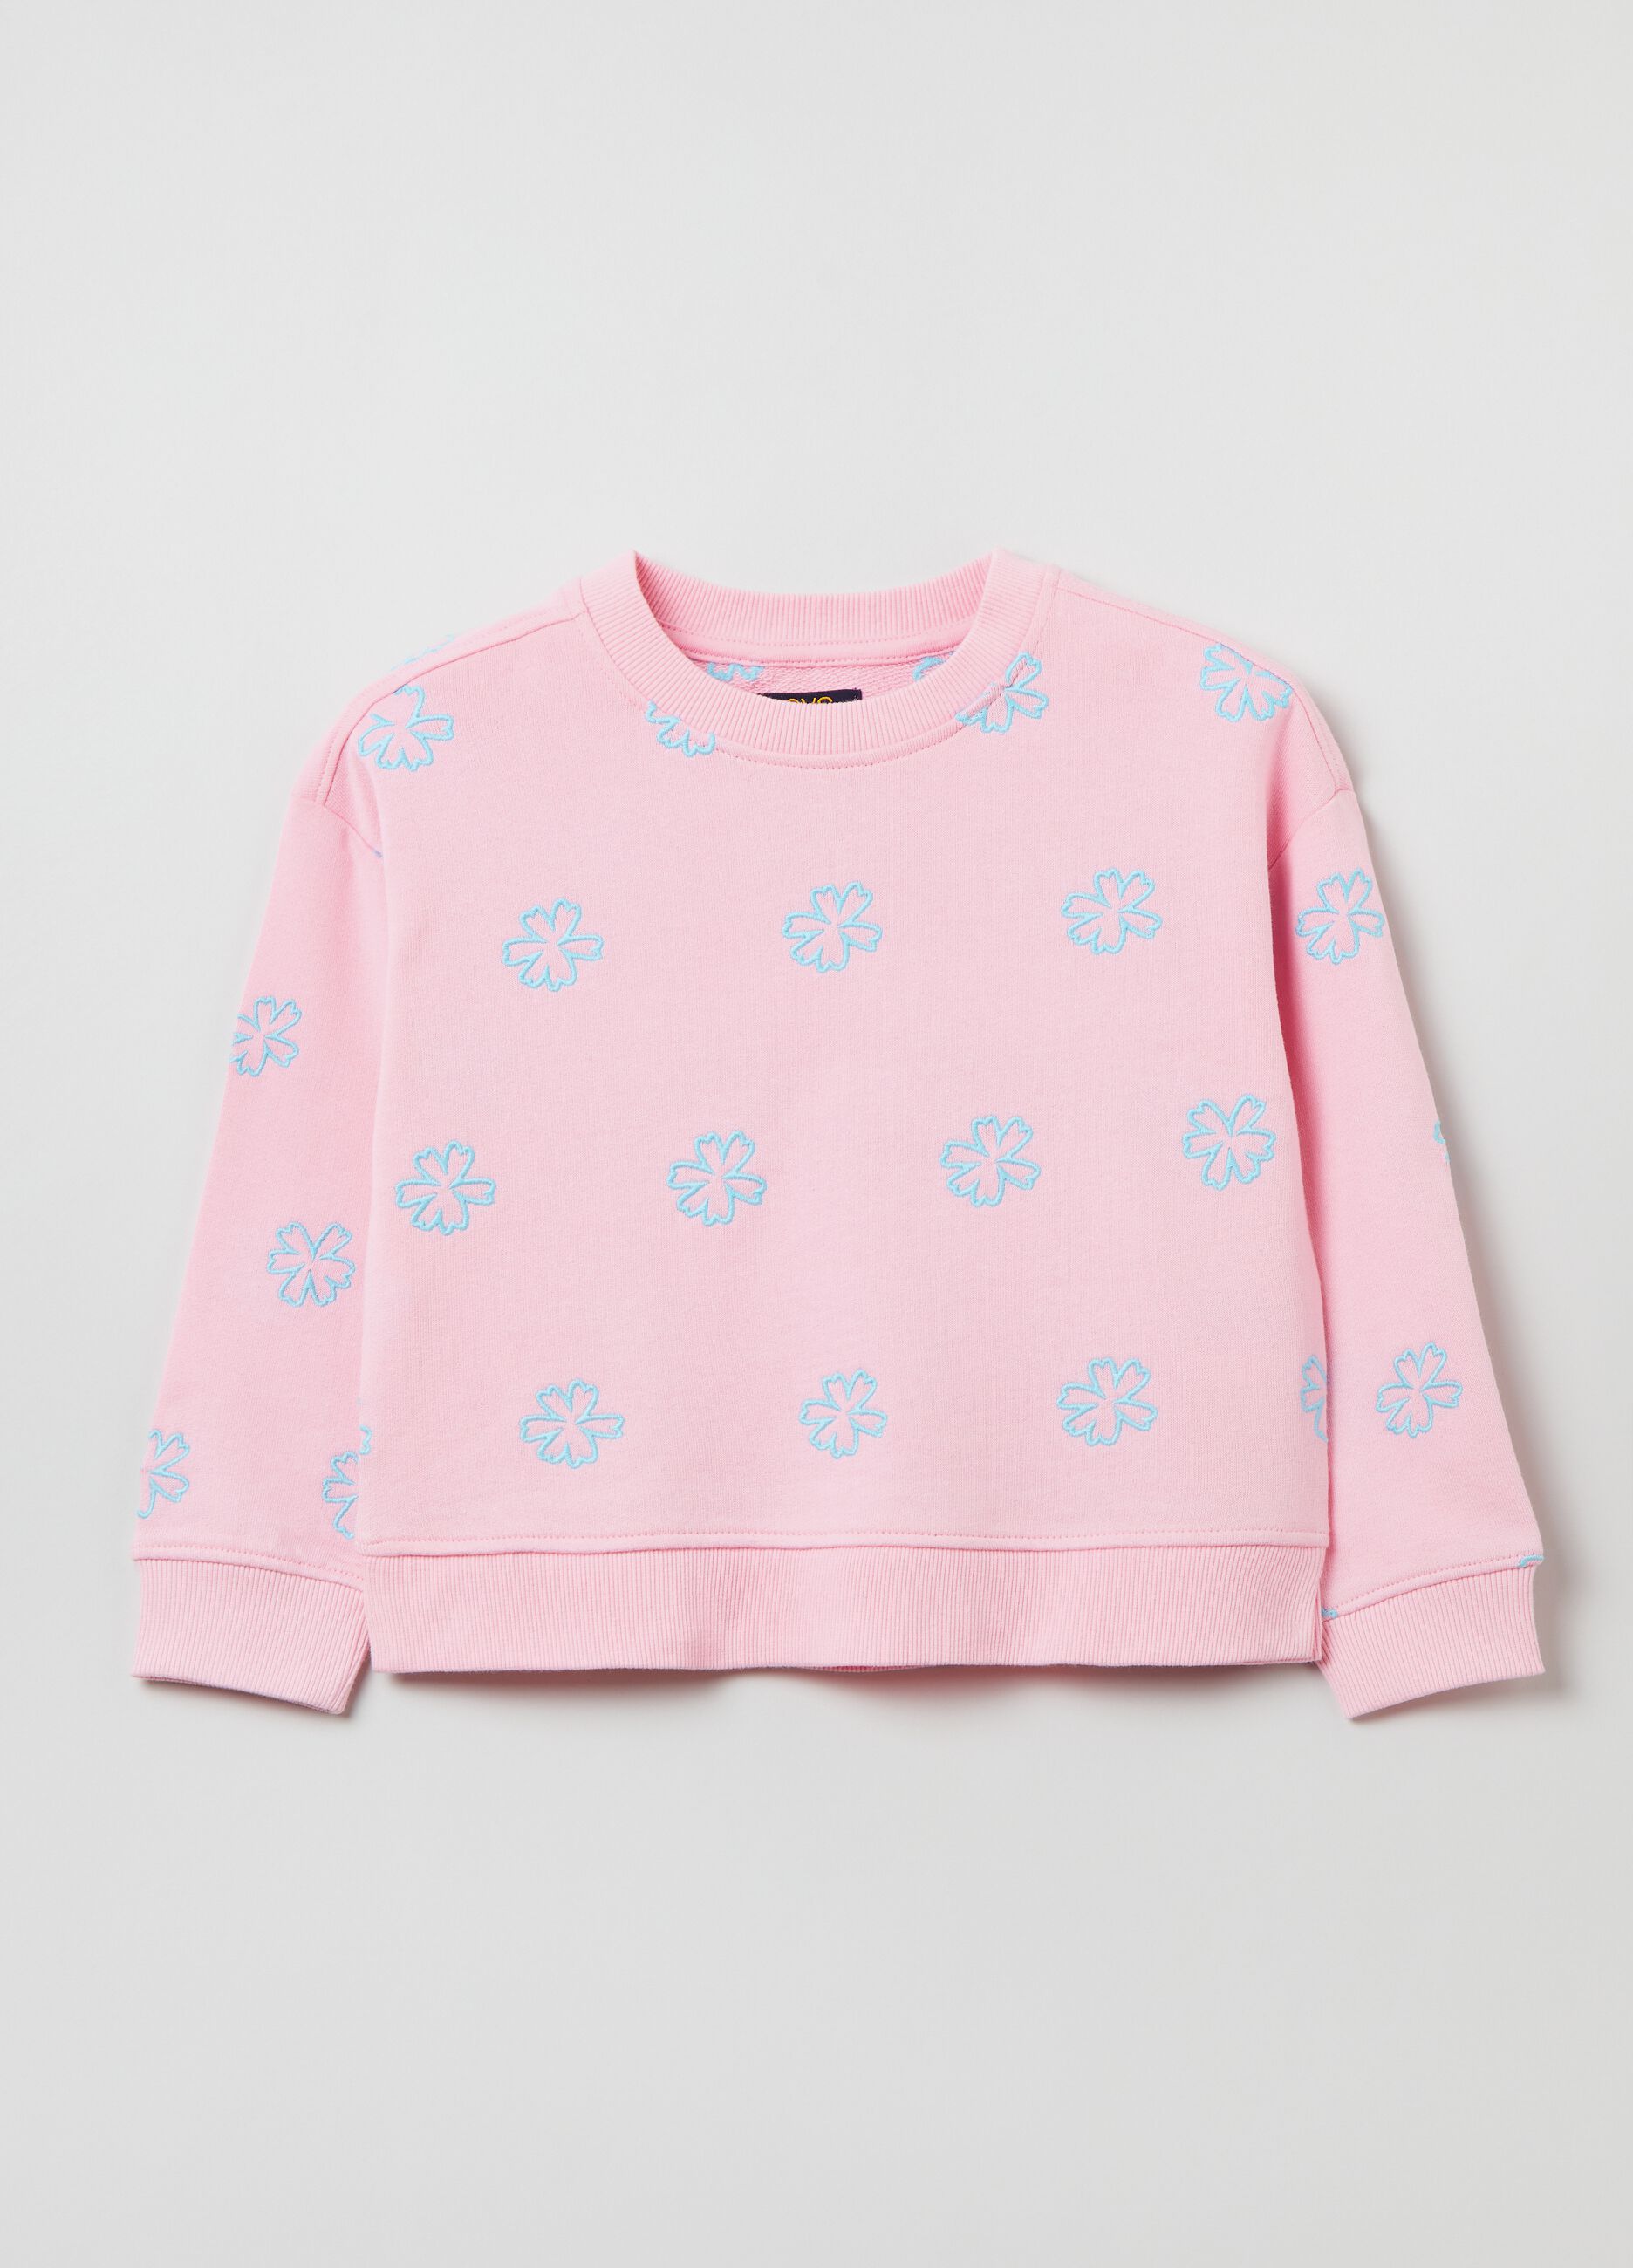 Cotton sweatshirt with small flowers embroidery